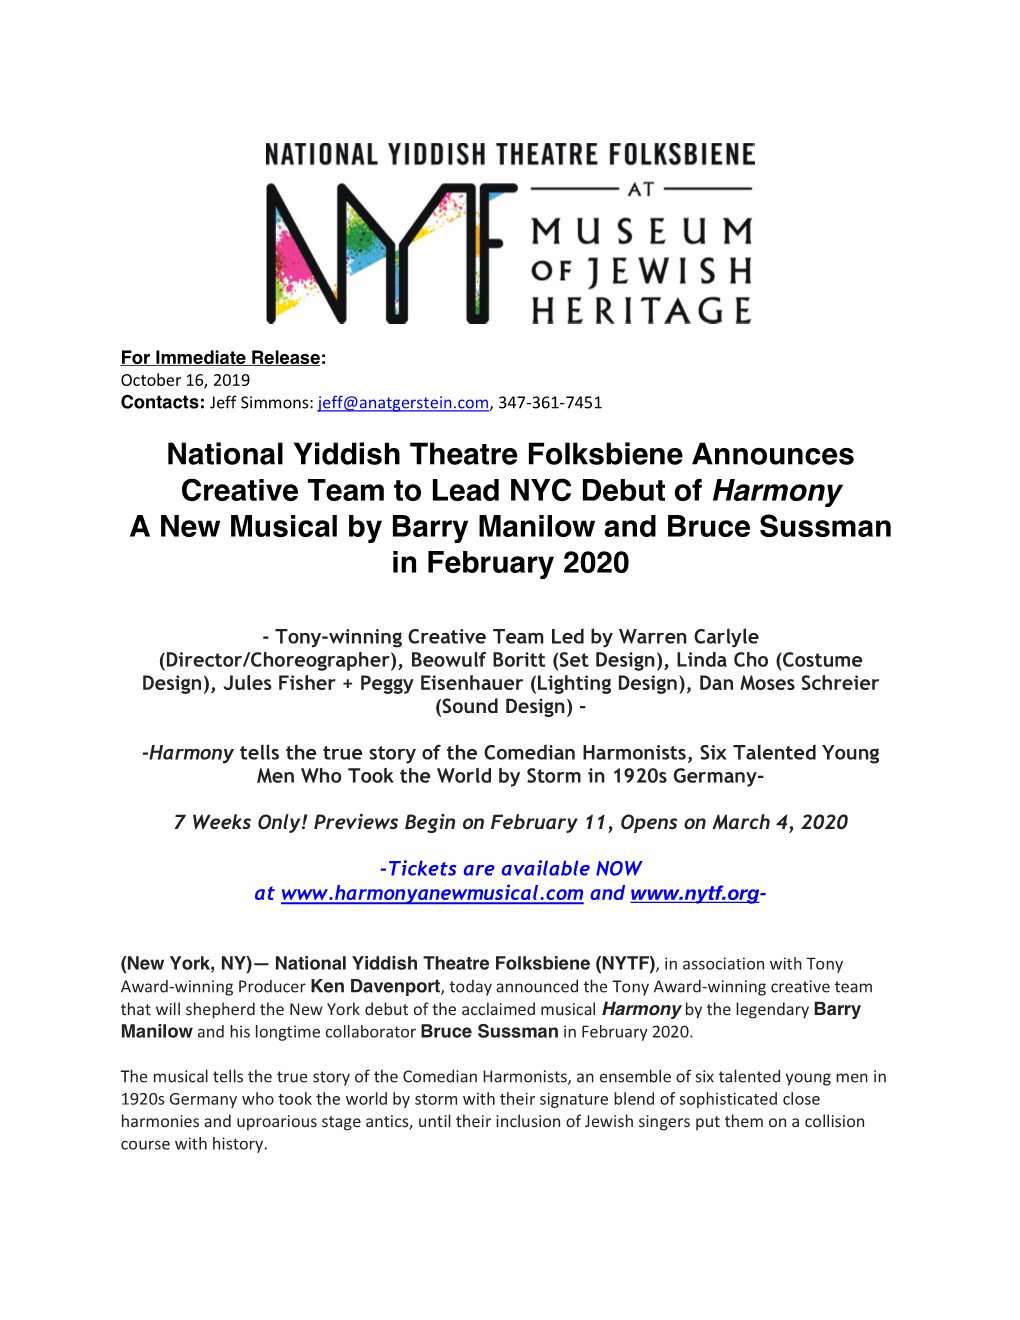 National Yiddish Theatre Folksbiene Announces Creative Team to Lead NYC Debut of Harmony a New Musical by Barry Manilow and Bruce Sussman in February 2020